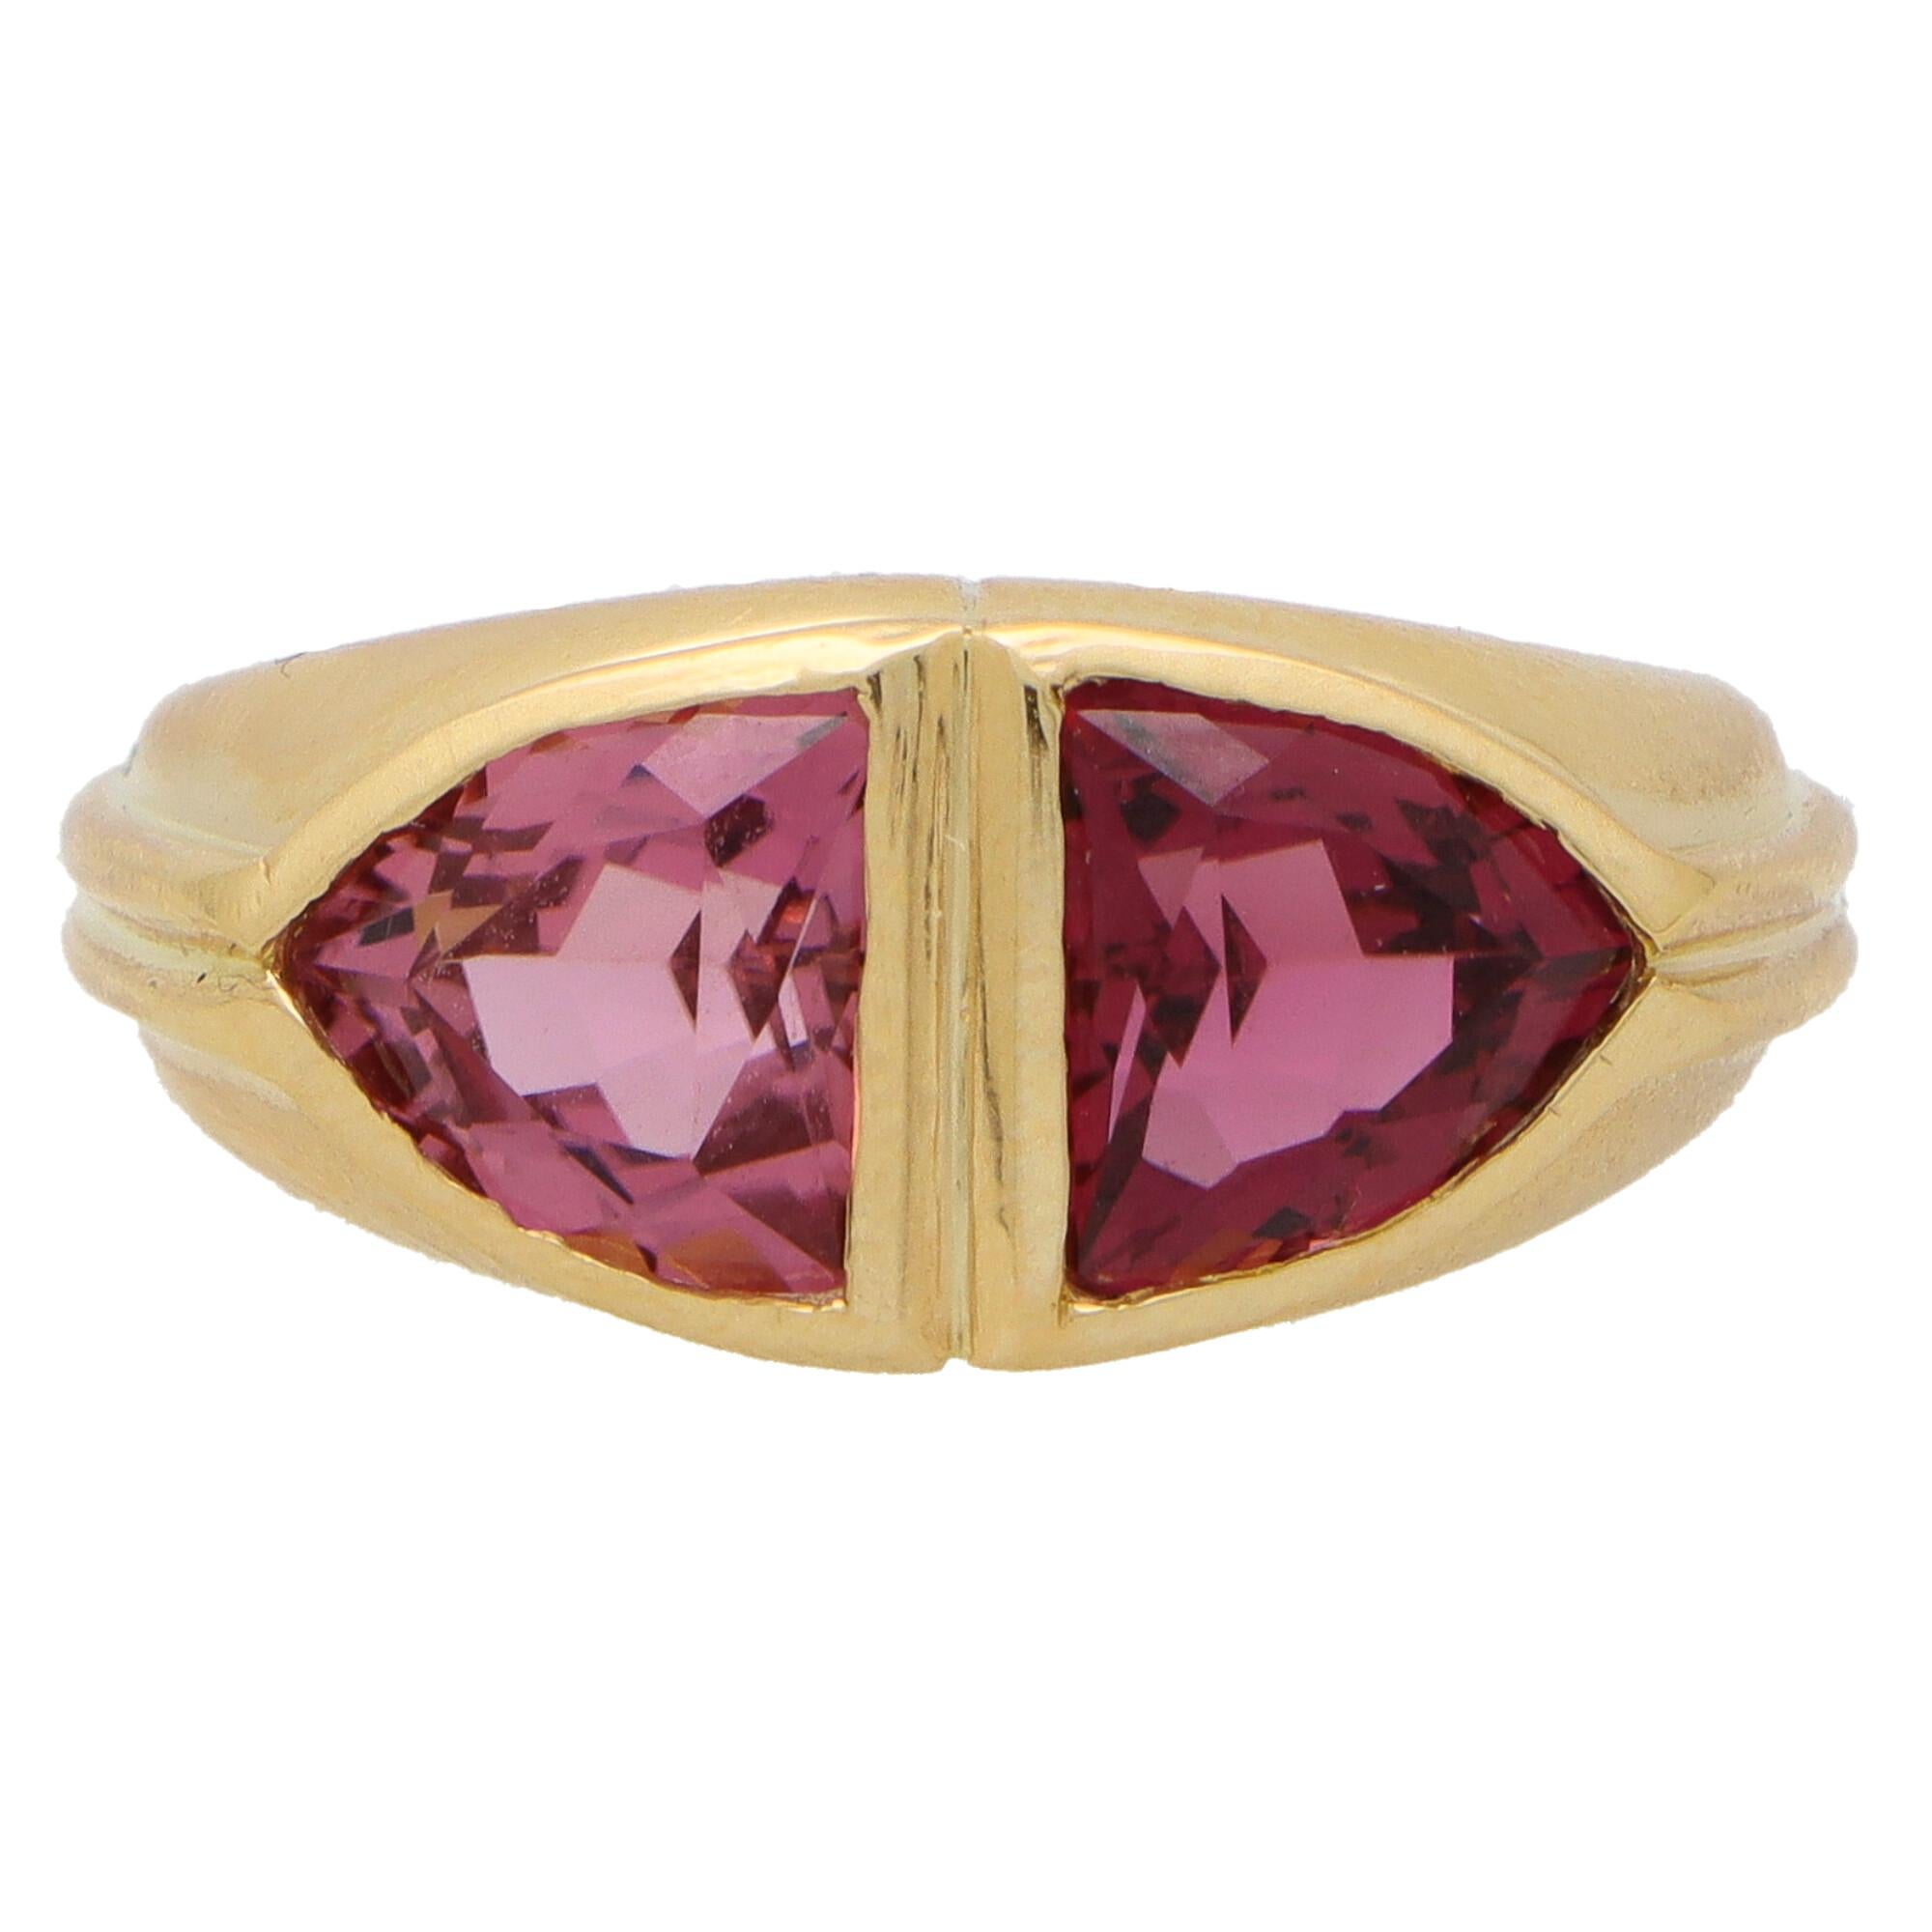 Trillion Cut Vintage Bvlgari Two Tone Pink Tourmaline Dress Ring in 18k Yellow Gold For Sale